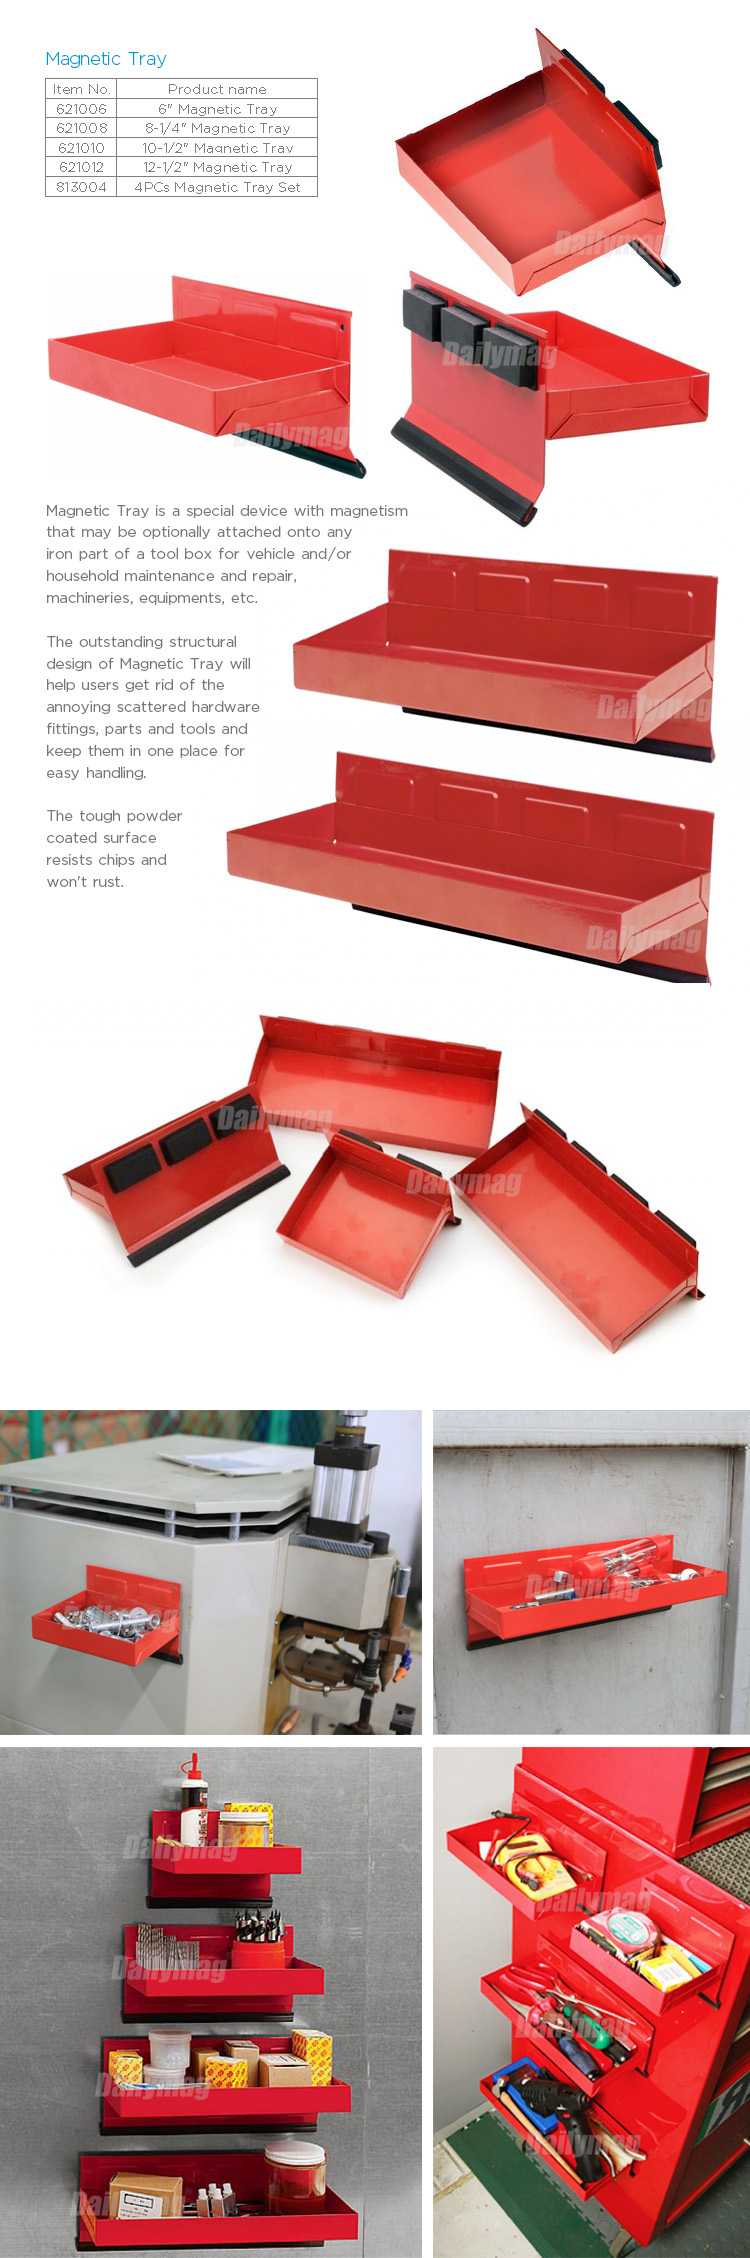 Magnetic tray, magnetic trays, Magnetic tray sets,magnetic tools --  Dailymag Magnetics